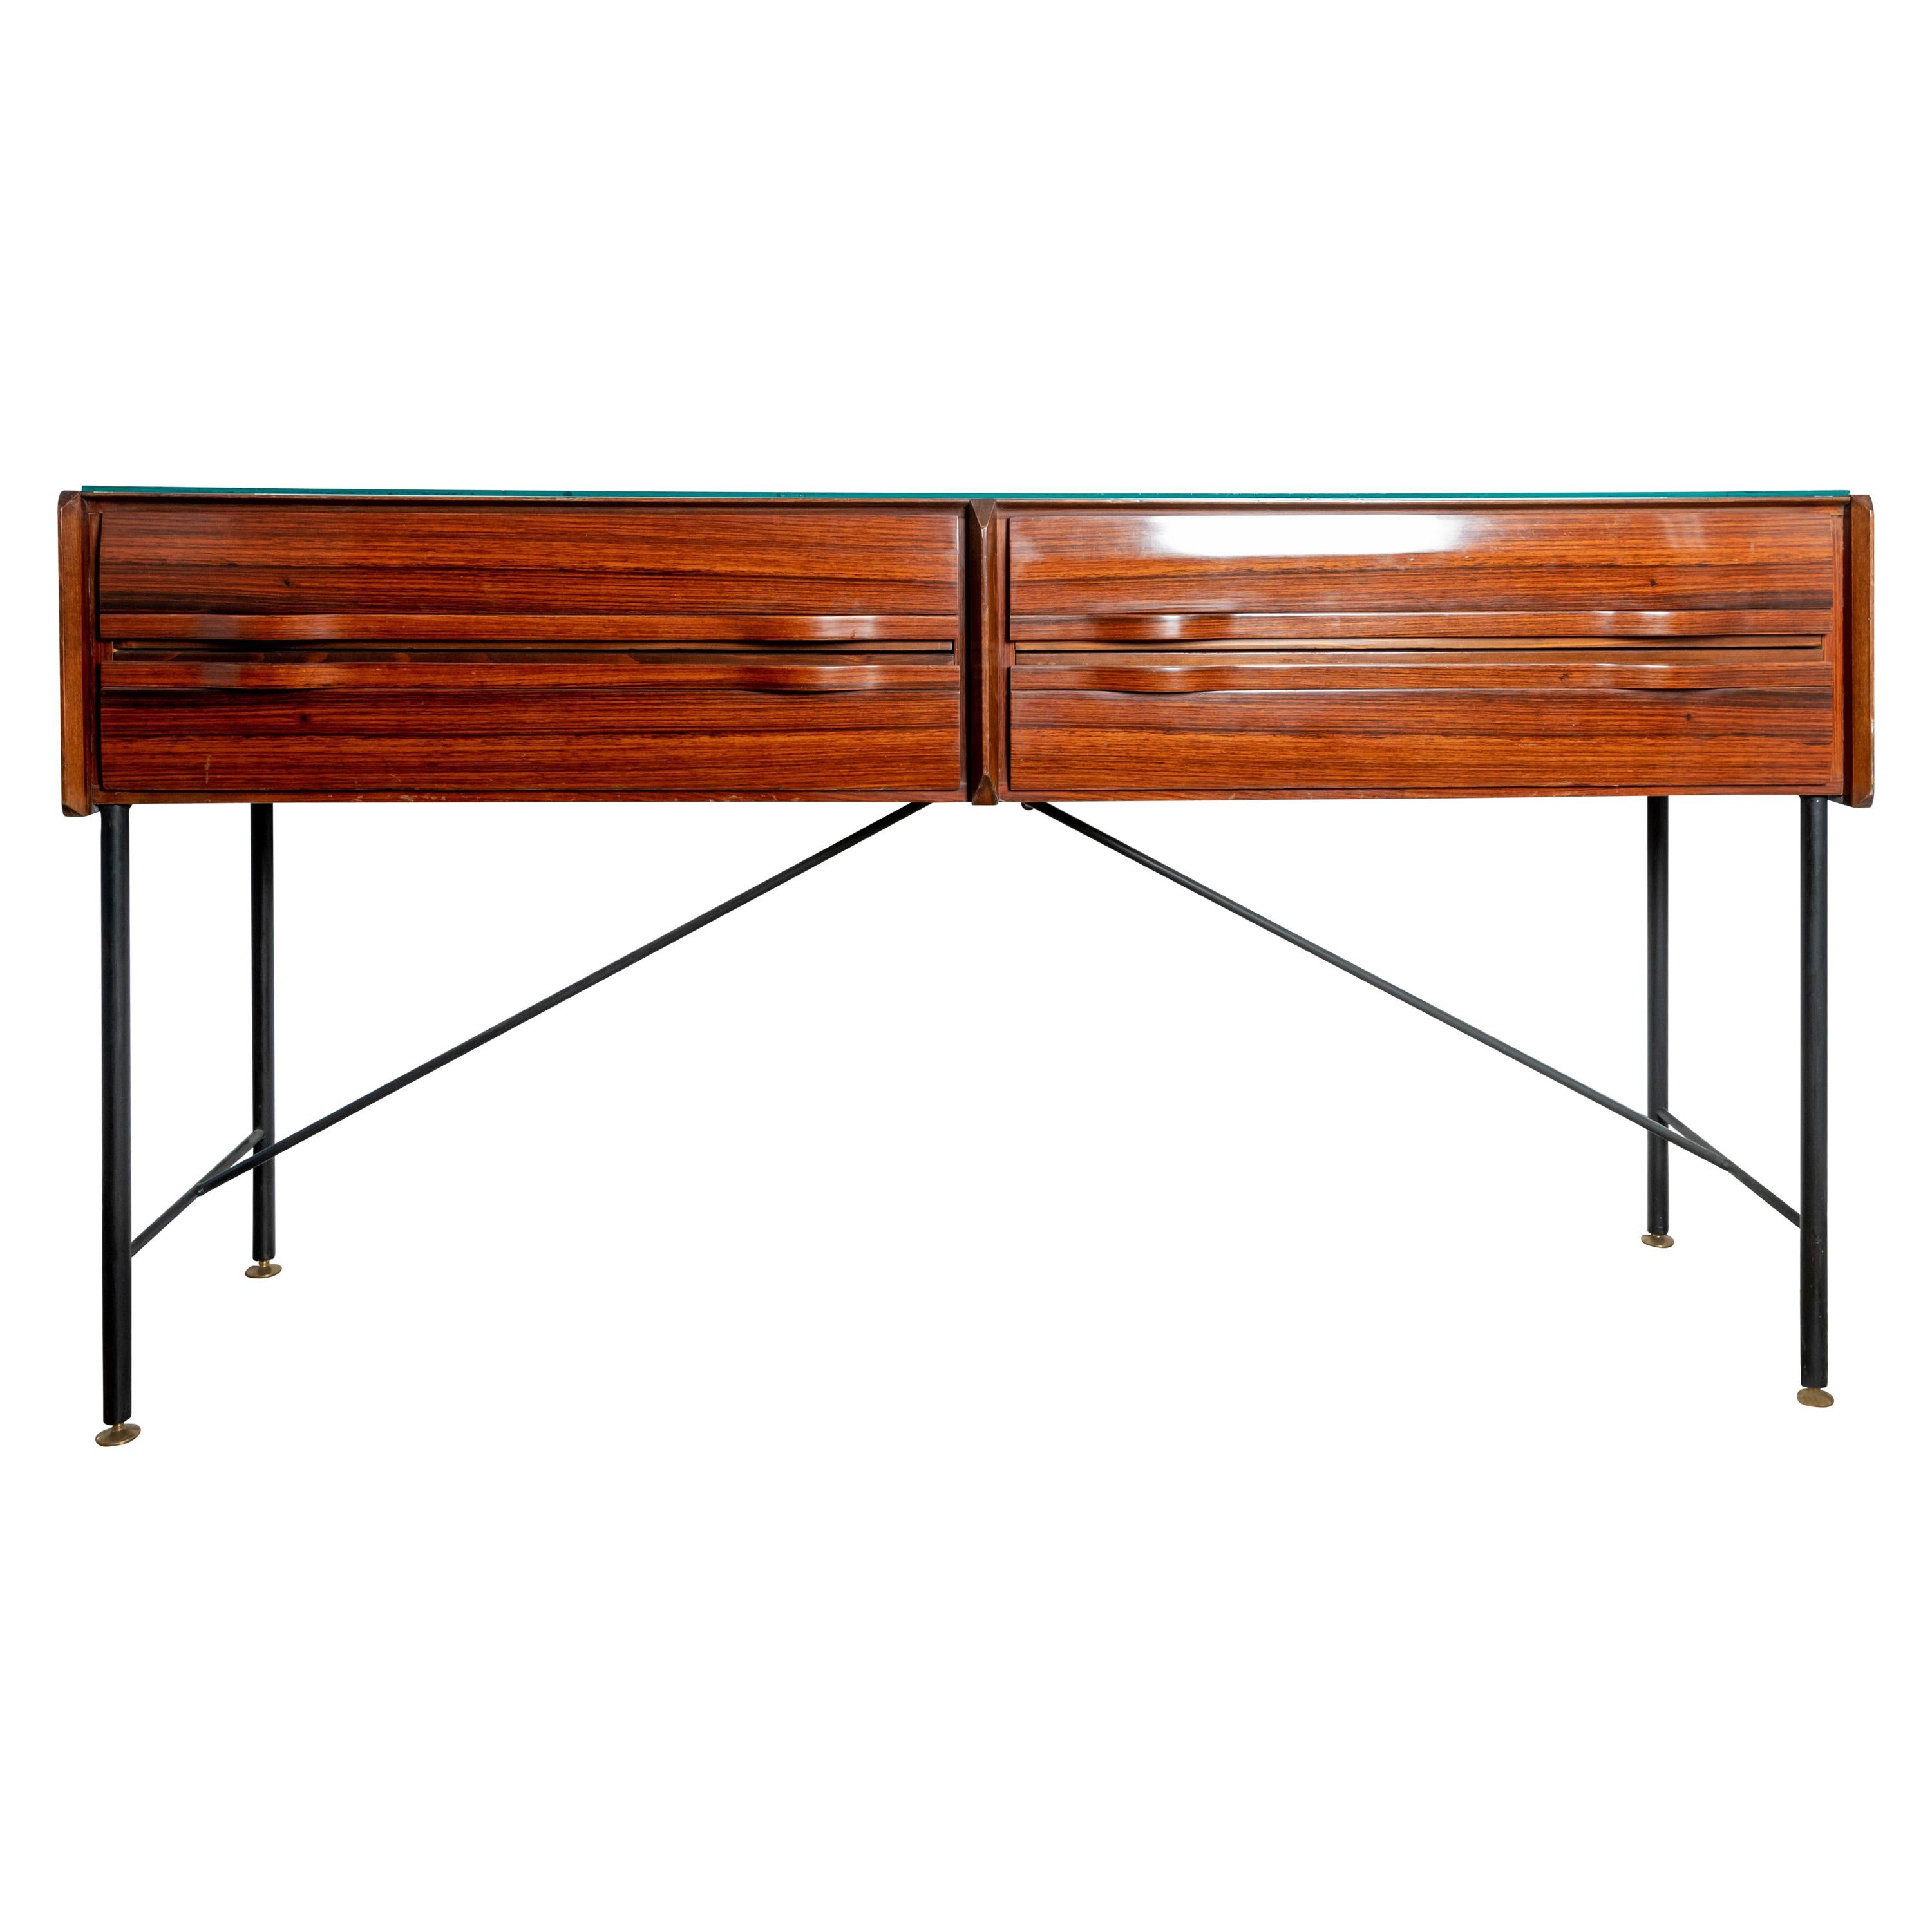 Rectangular Rosewood Four Drawer Sideboard/Console with Blackened Iron Supports